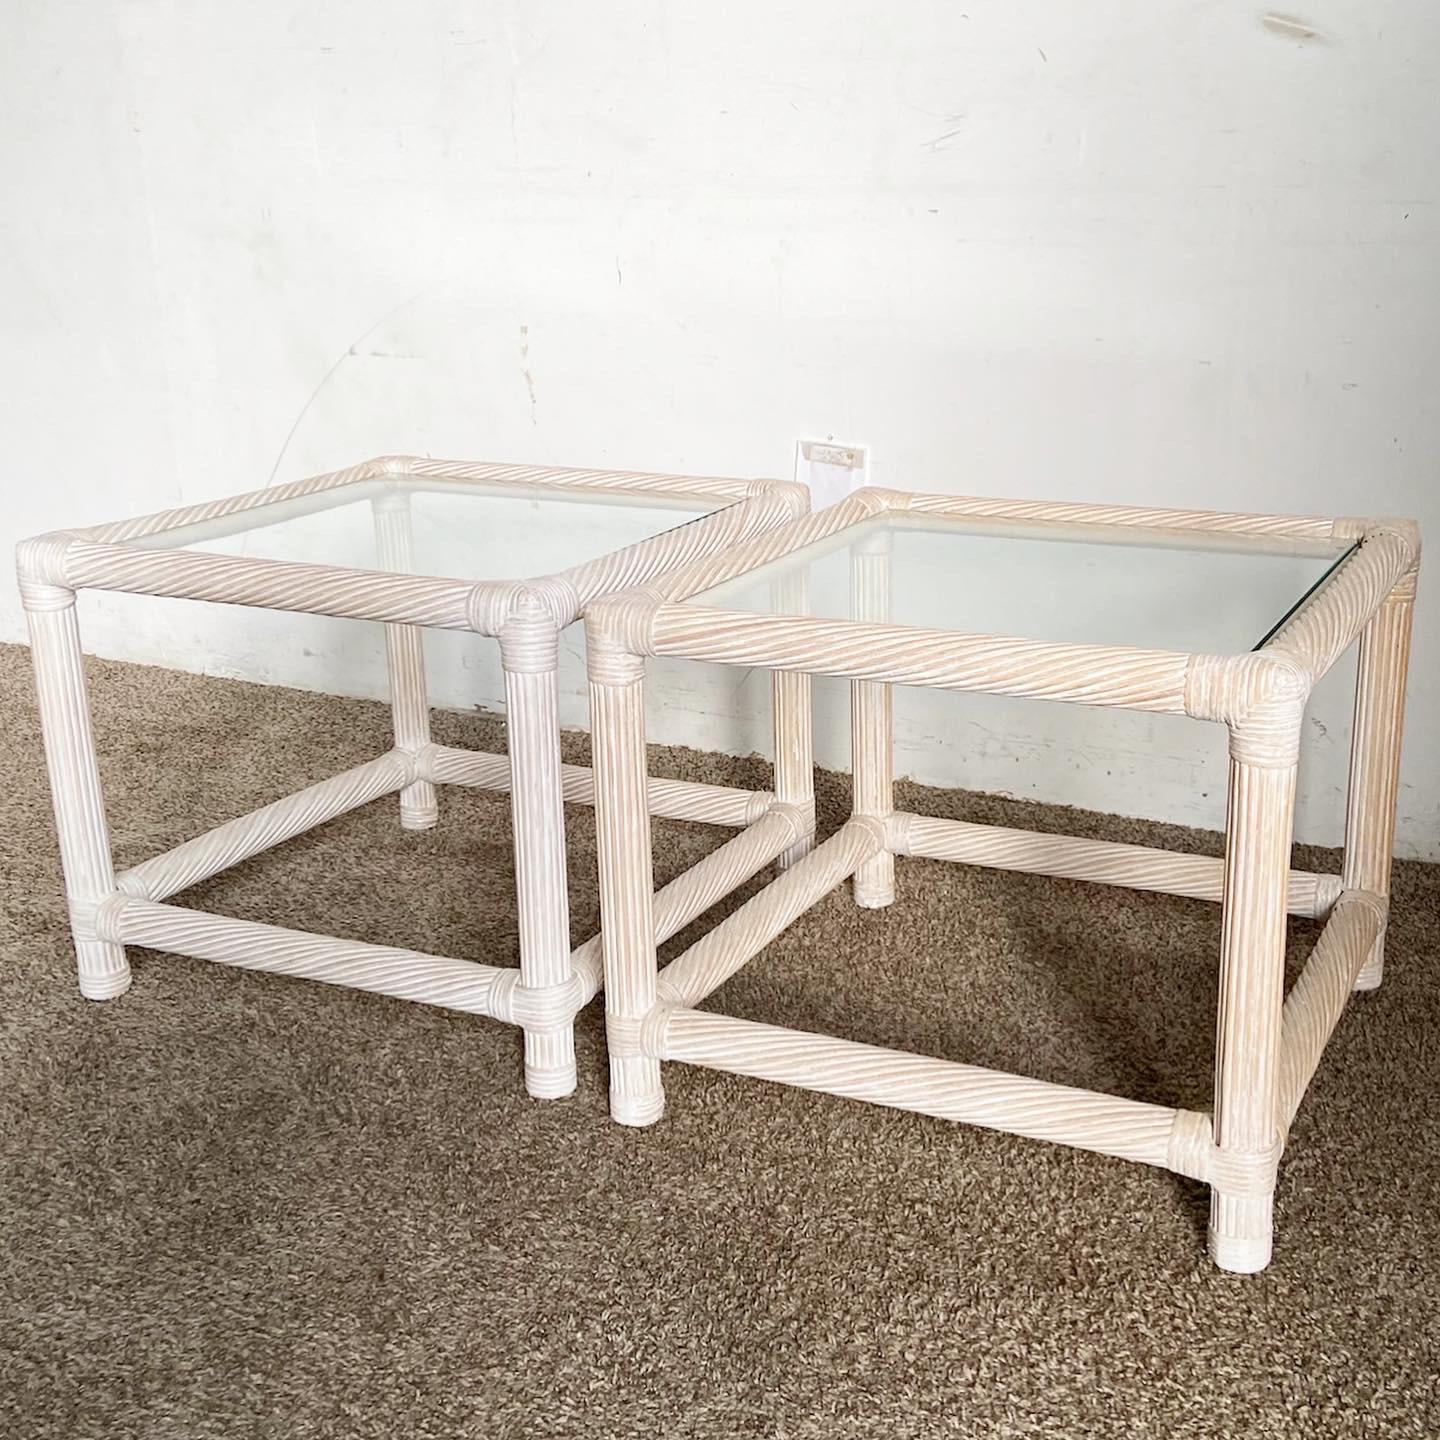 Introduce a touch of Boho Chic with this pair of side tables. Featuring spun pencil reed and rattan bases with sleek glass tops, they blend organic textures with modern elegance.
Minor wear on these Boho Reed Rattan Side Tables as seen in the photos.